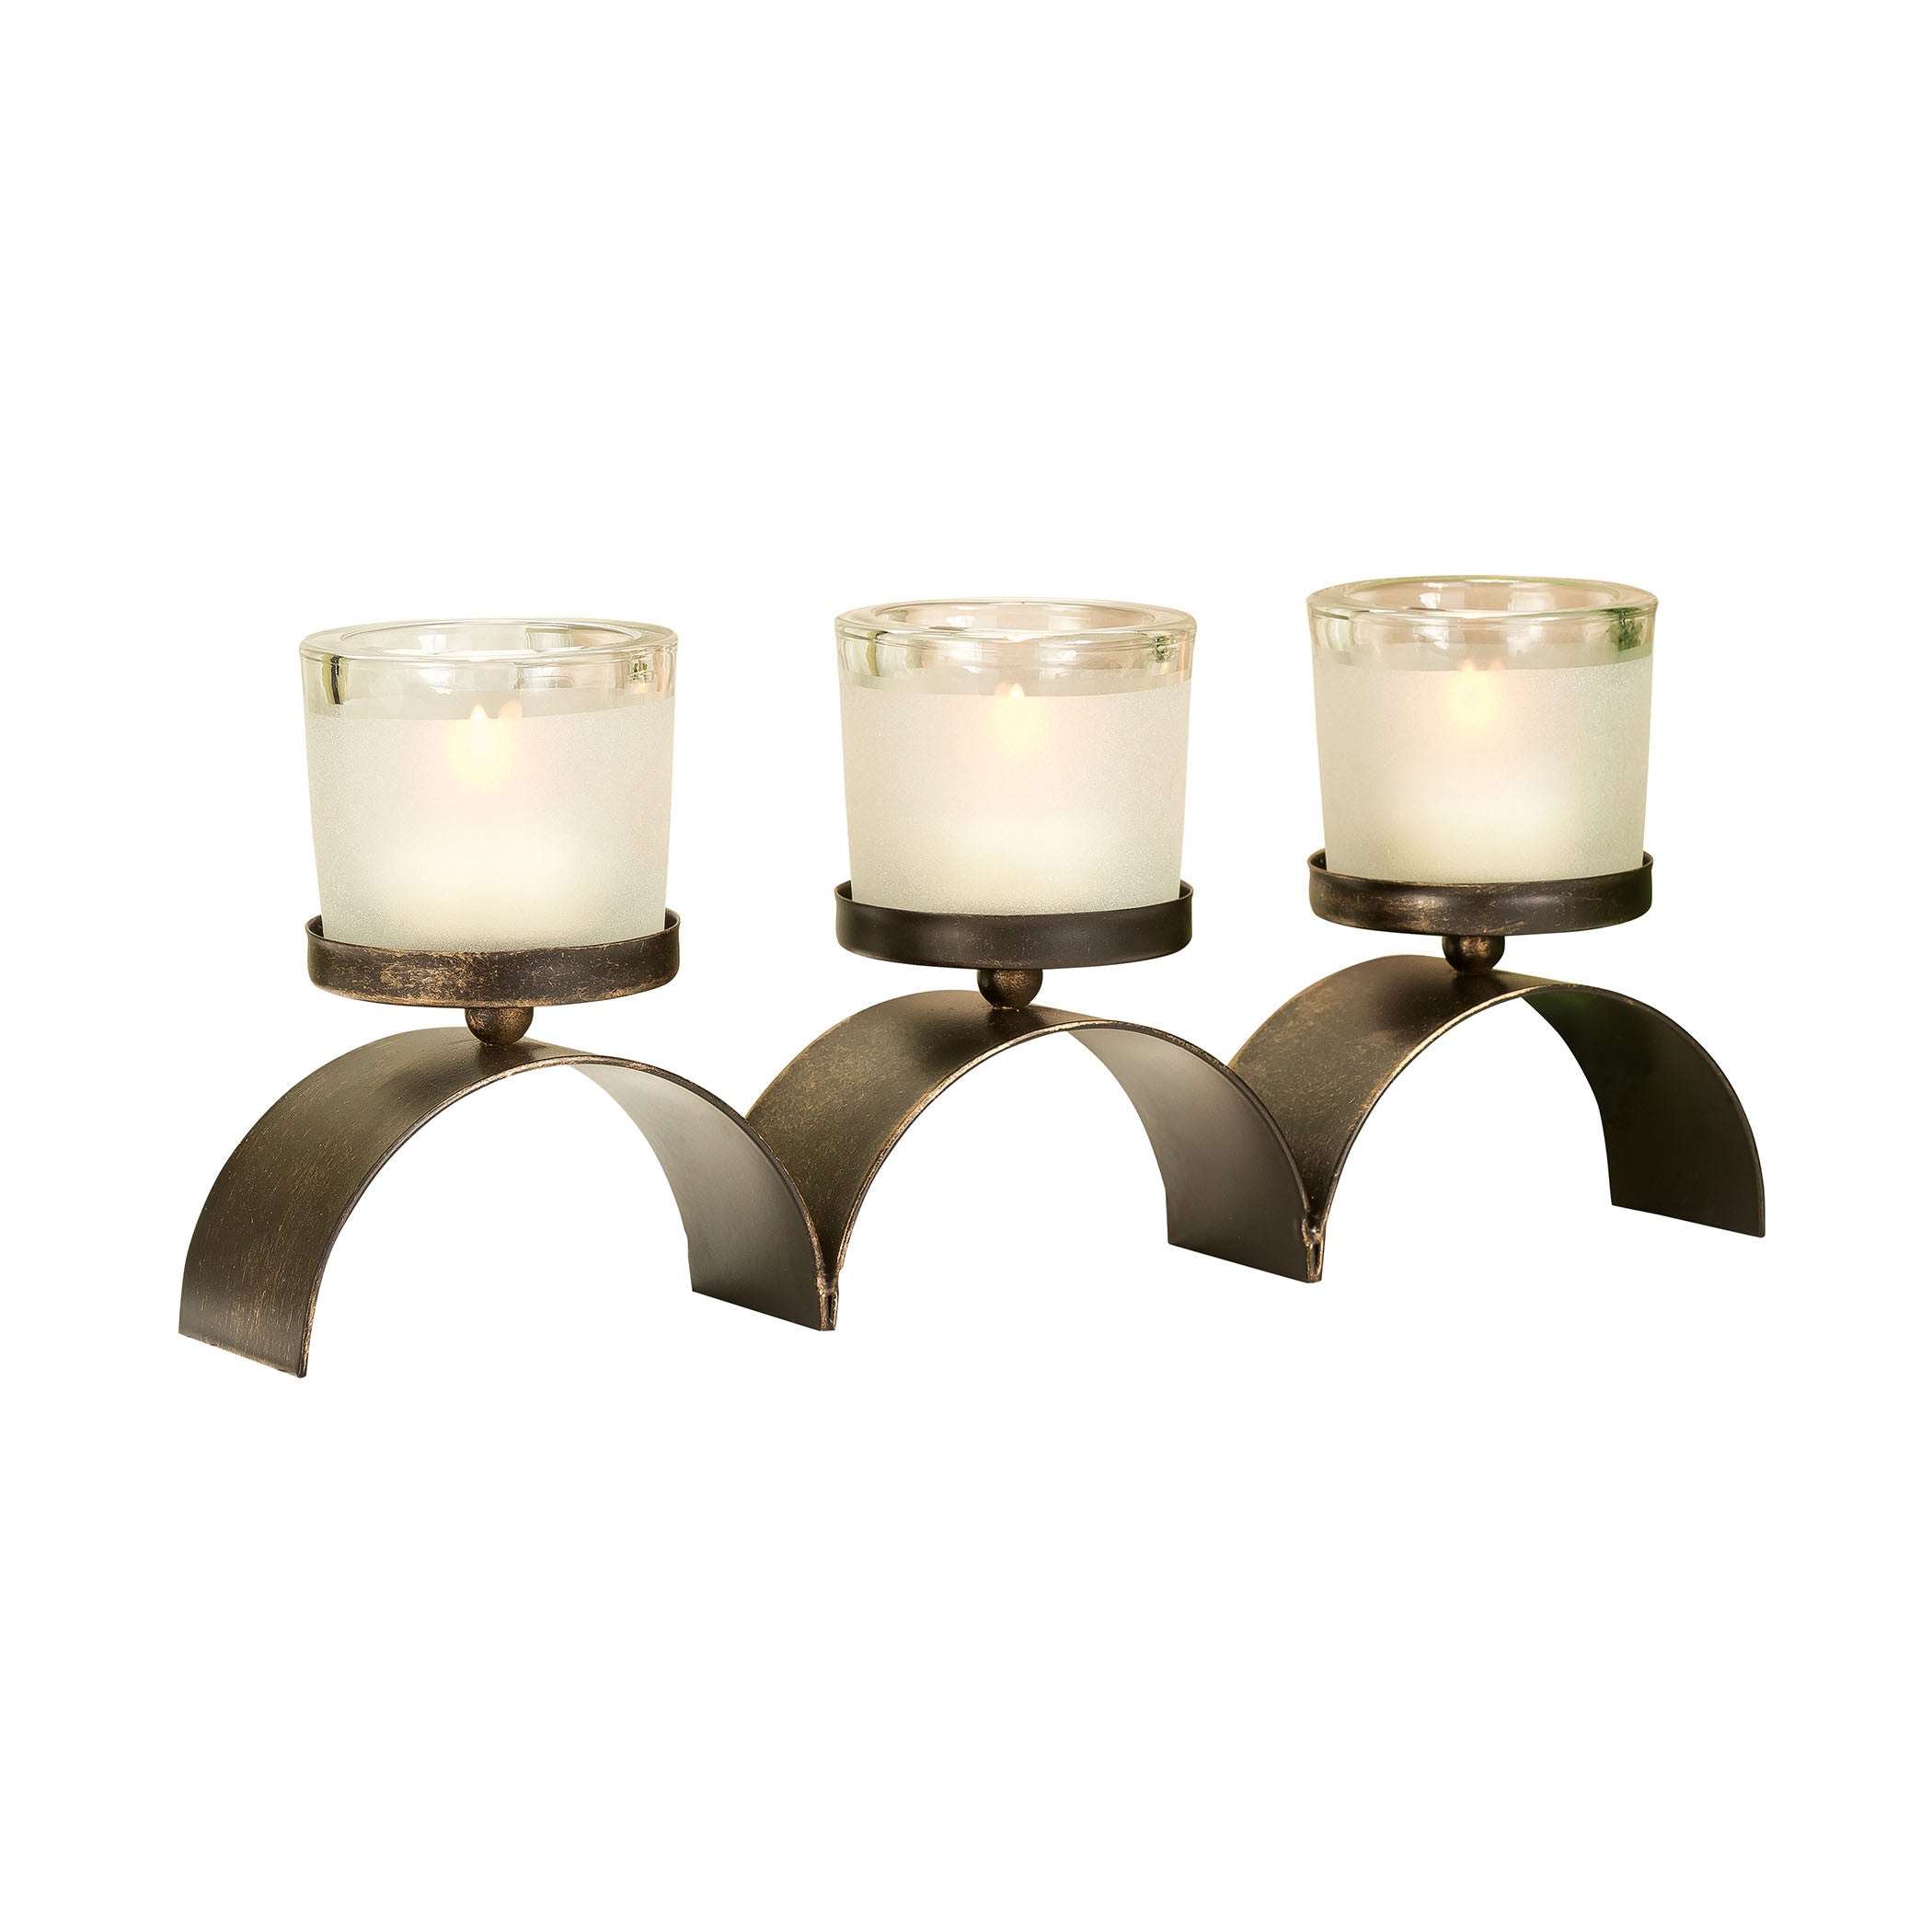 Pomeroy Pom-670329 World Collection Antique Bronze,frosted Finish Candle/candle Holder